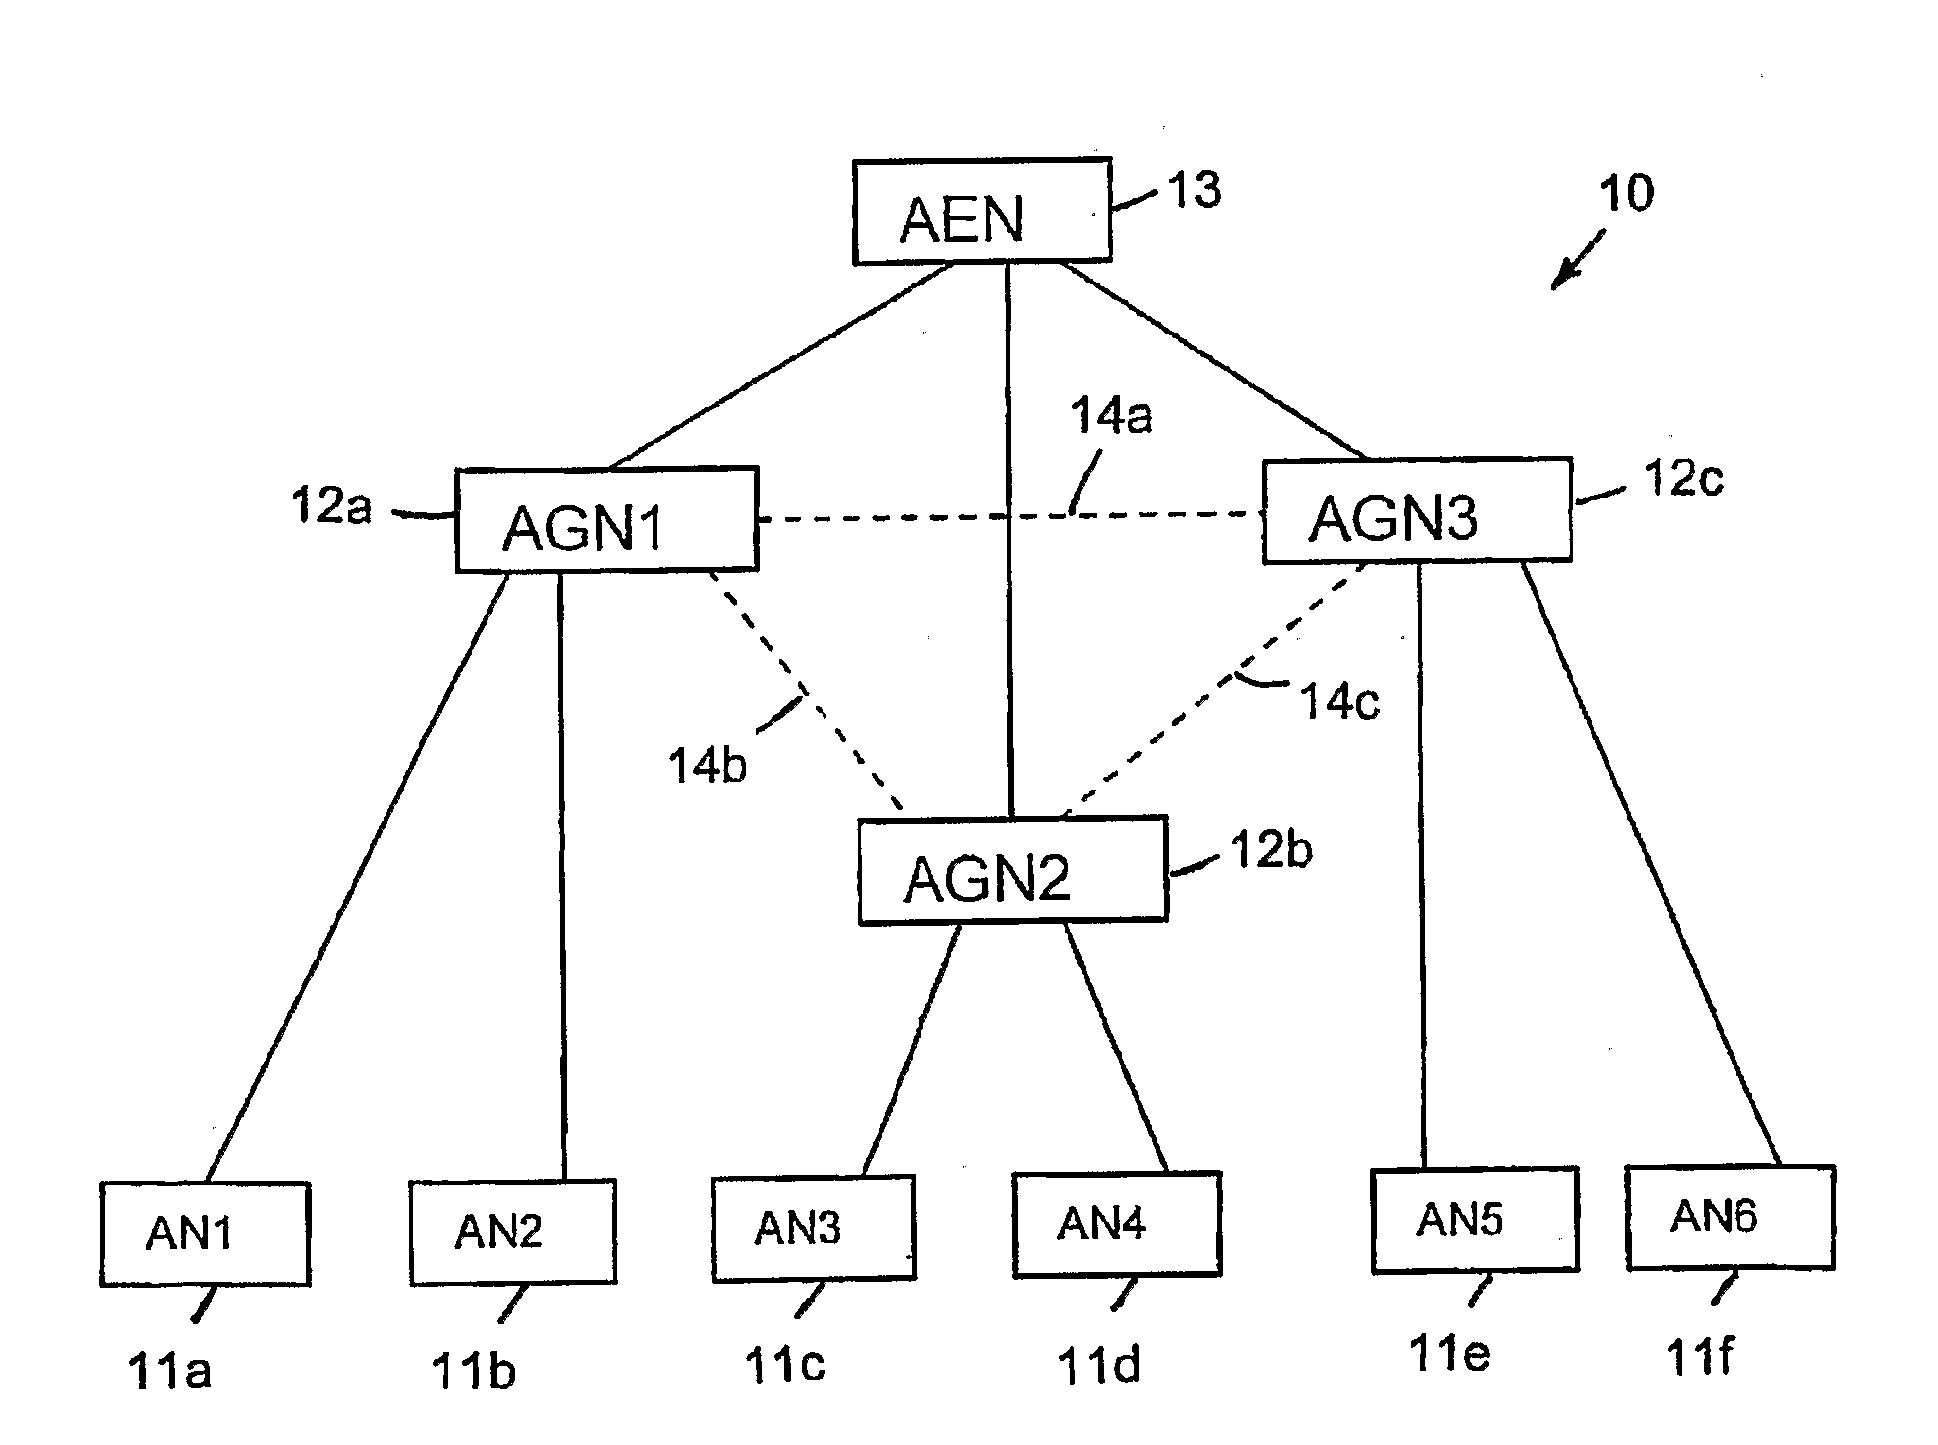 Admission Control Utilizing Backup Links in an Ethernet-Based Access Network